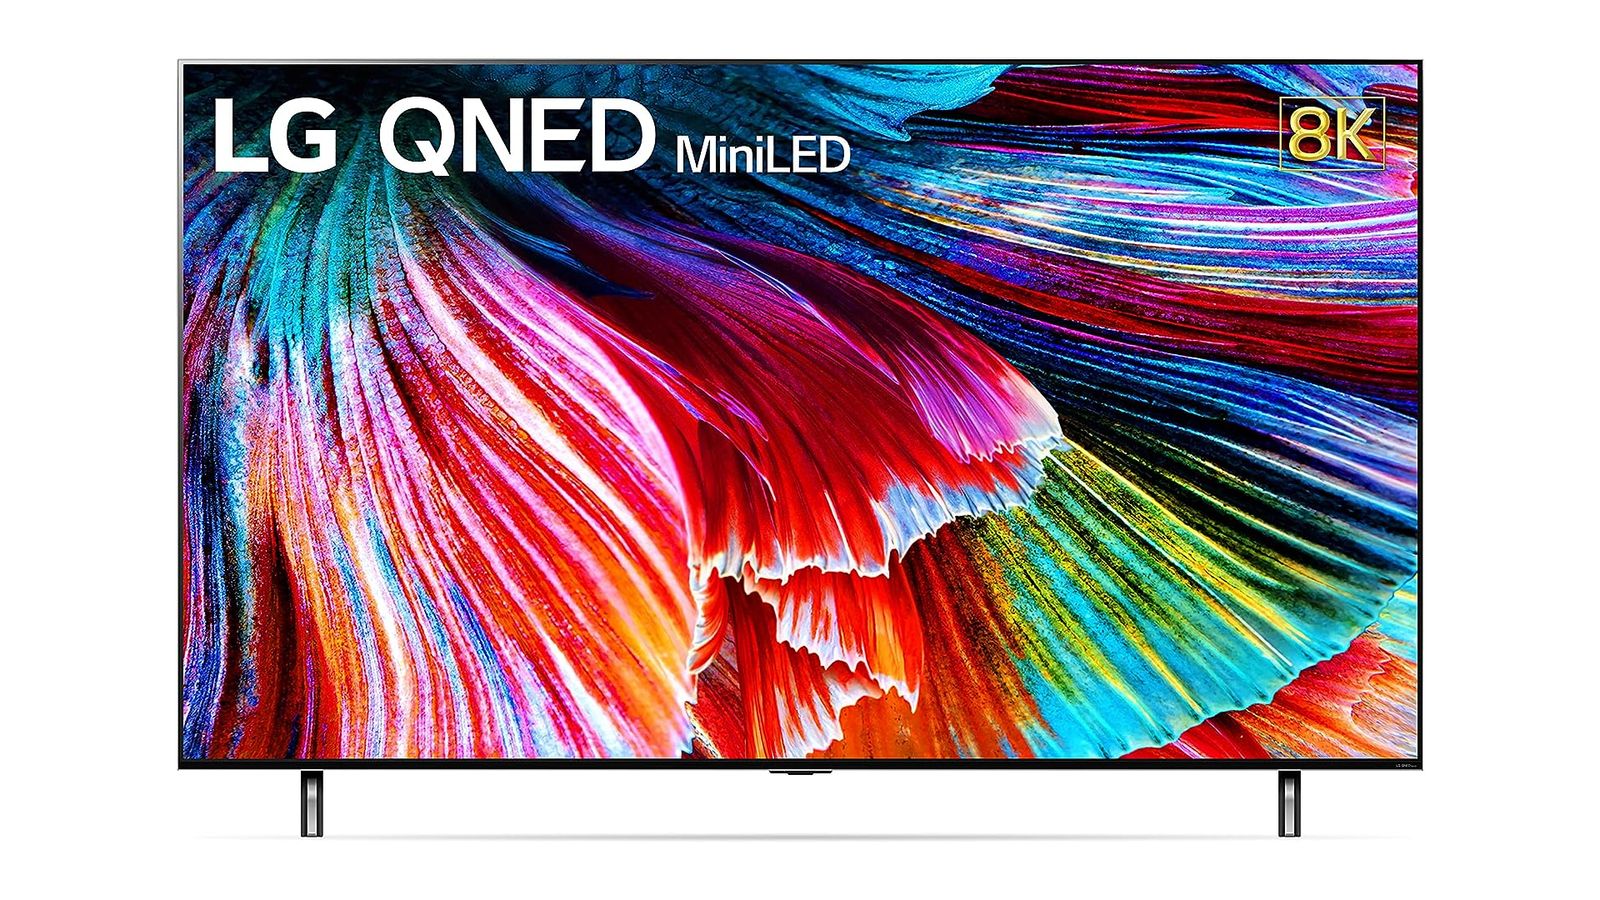 LG 65QNED99UPA product image of a black flatscreen TV with a multicoloured red, purple, blue, orange, and pink pattern on the display.